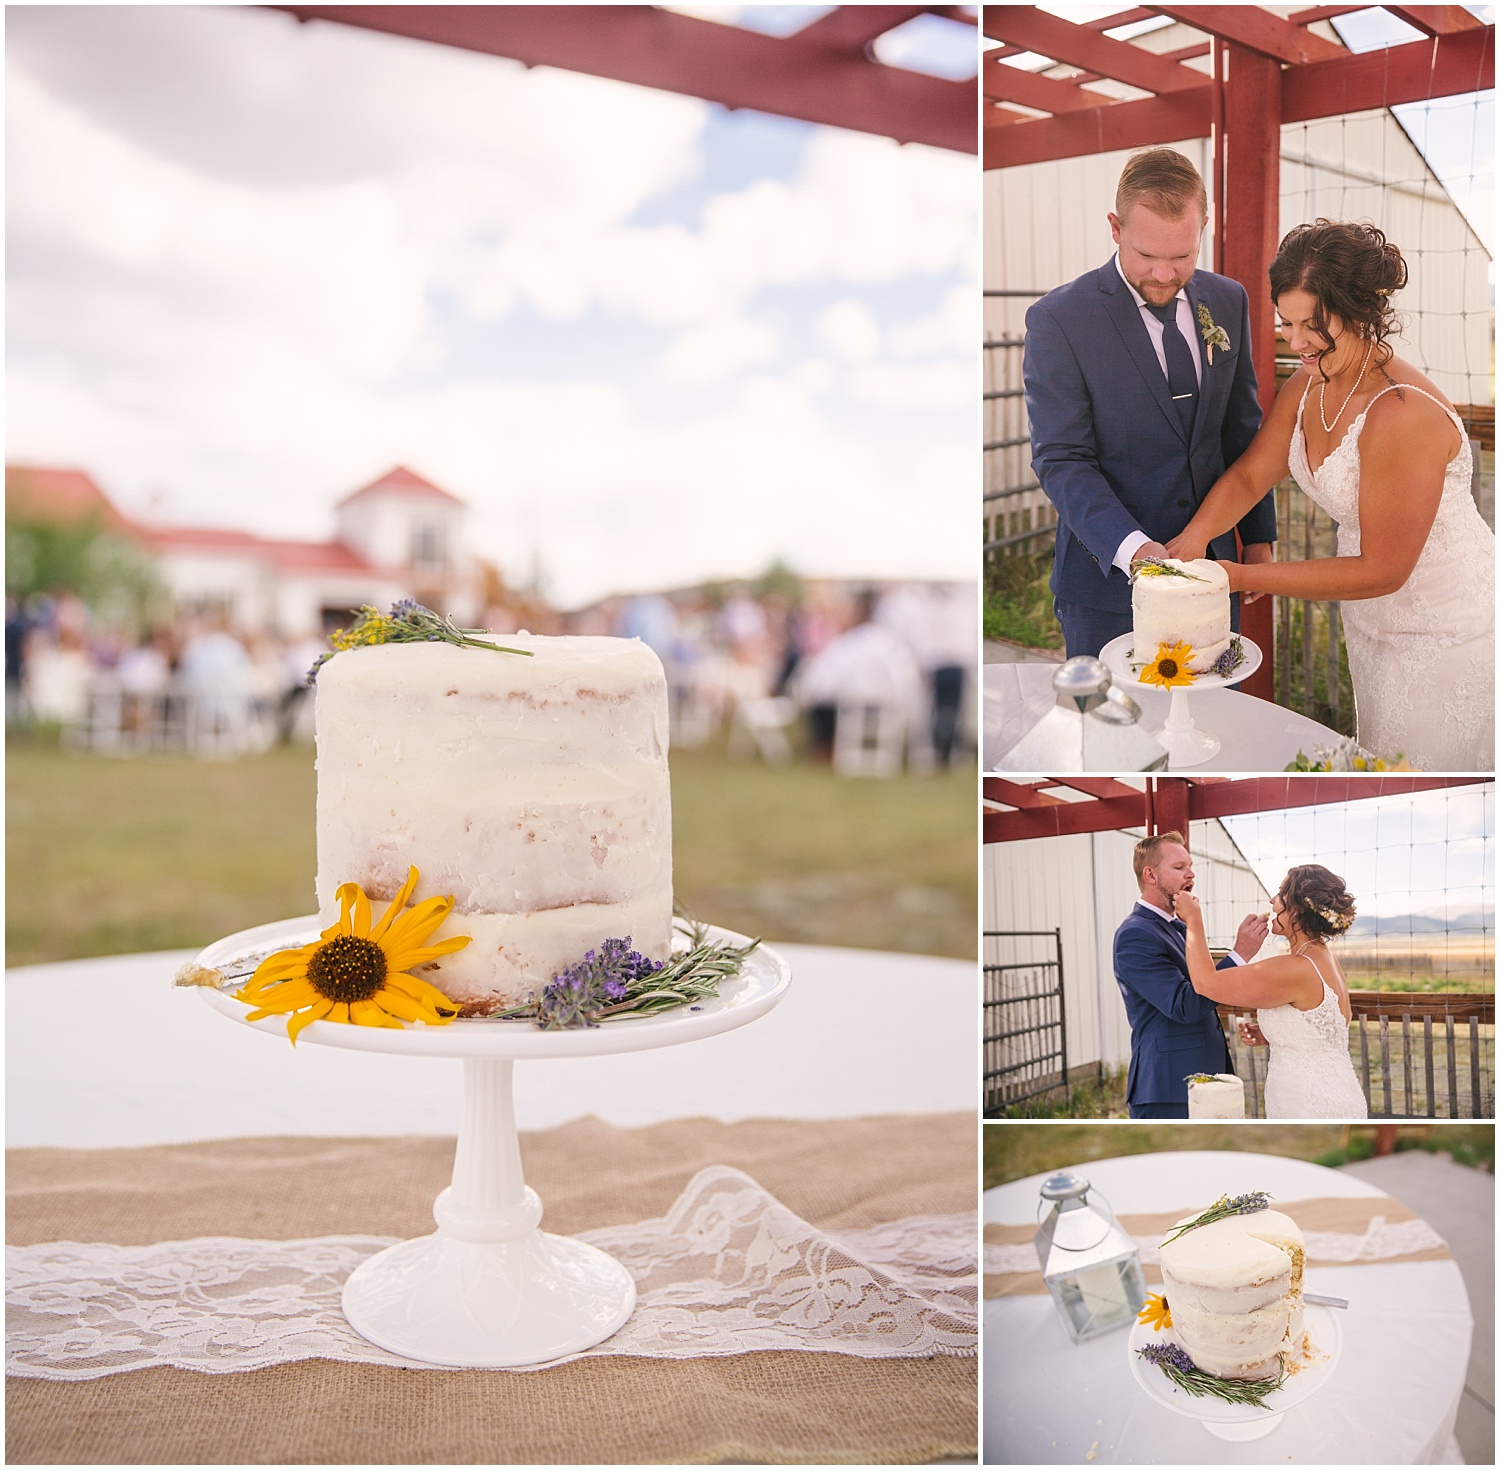 Bride and groom cutting their cake at their Guyton Ranch wedding